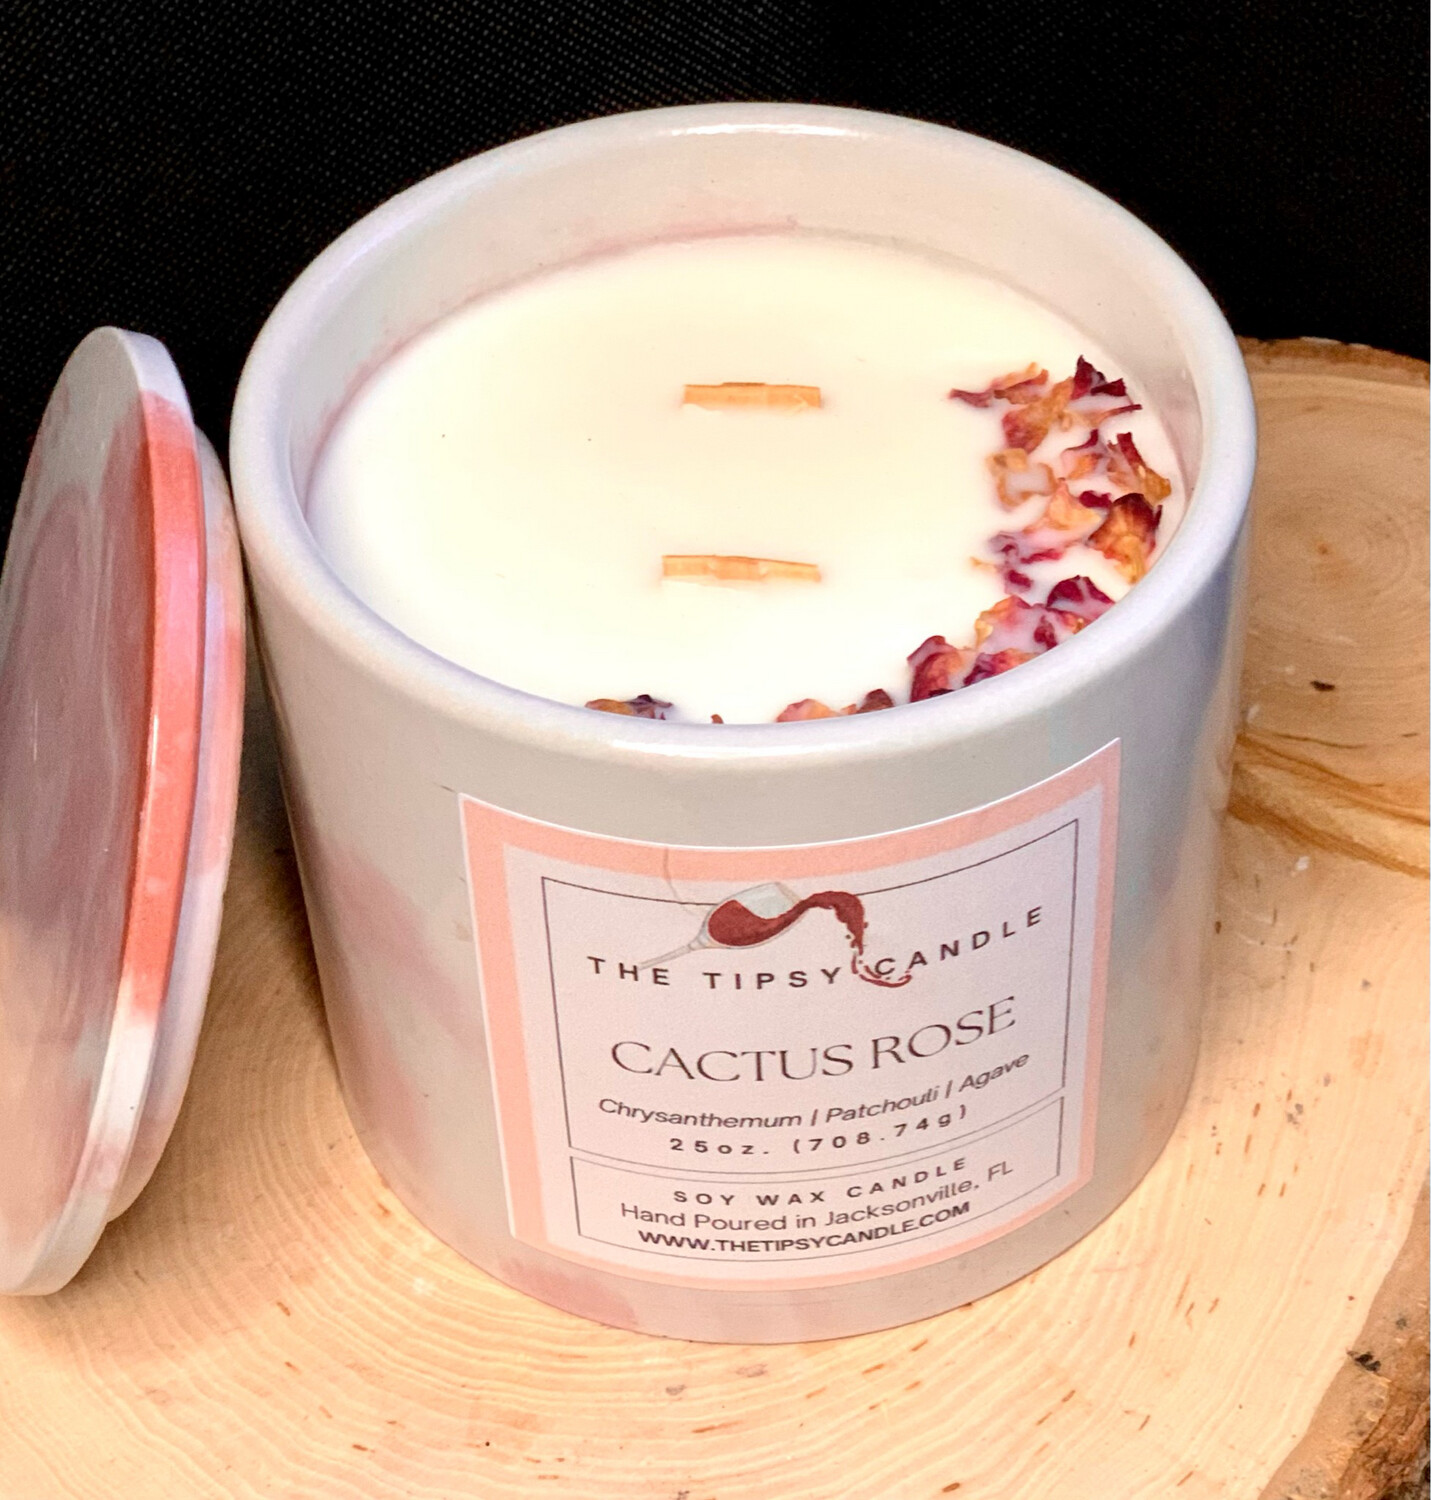 Cactus Rose 25oz Soy Wax Candle